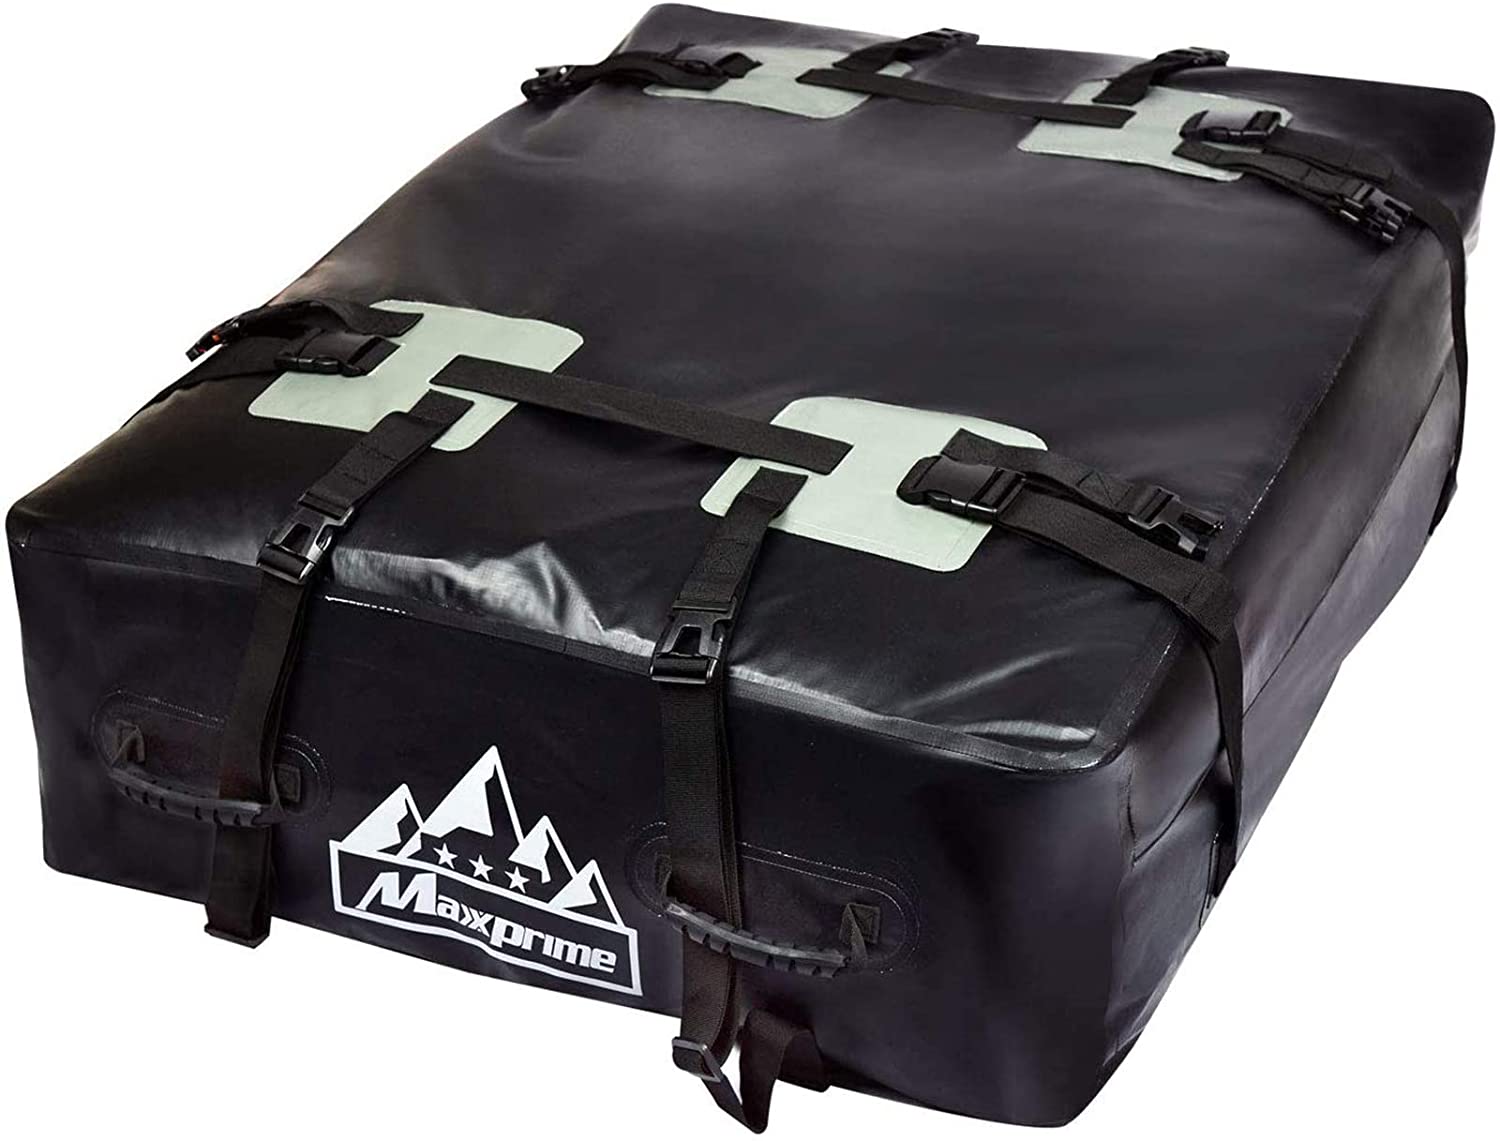 MAXXPRIME Waterproof Cargo Bag, Heavy Duty Rooftop Soft-Shell Carrier Bag with Handles - Works with or Without Roof Rack, Best for Traveling, Cars, Vans, SUVs (15 Cubic Feet)